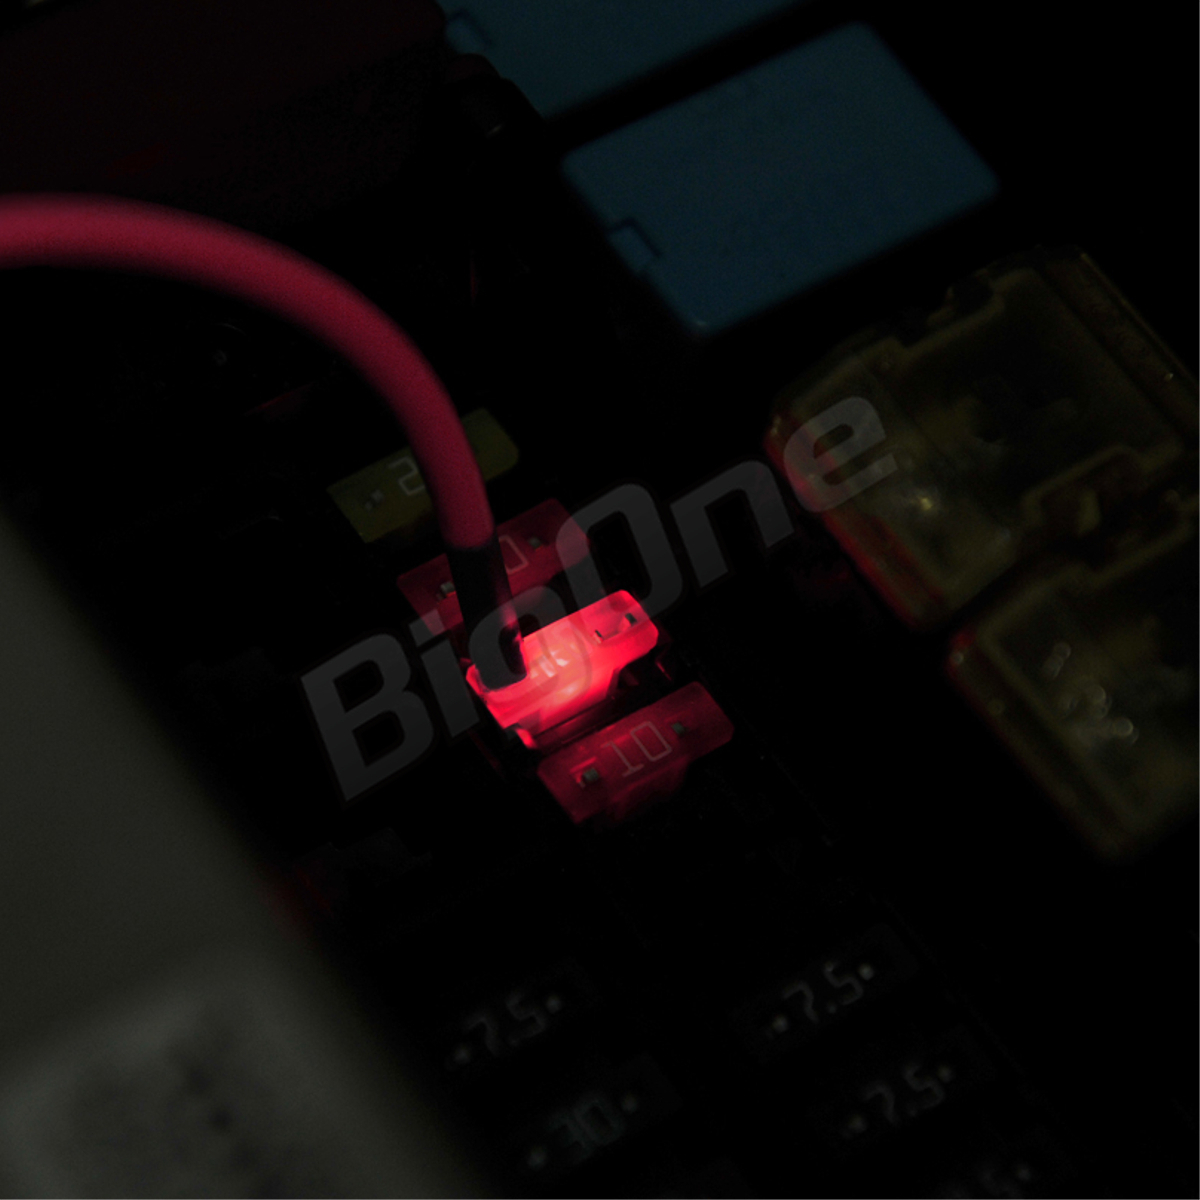 BigOne torn .. light ...... indicator built-in standard flat type fuse power supply 10A ATP LED chigar lighter ETC drive recorder. connection 